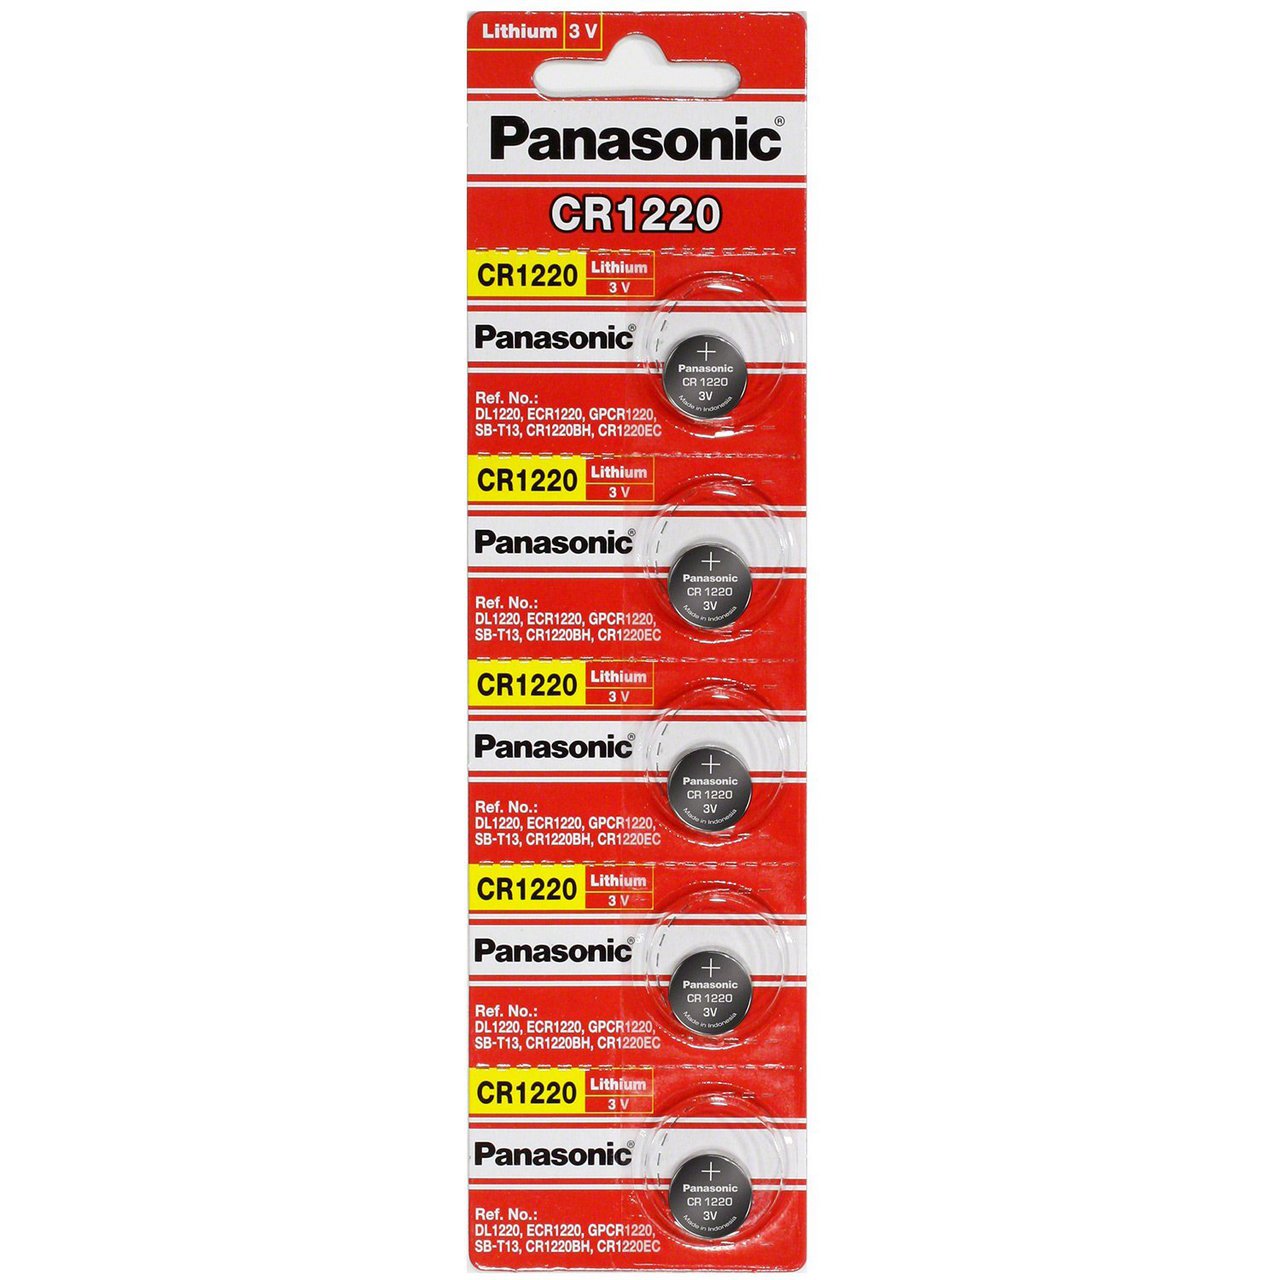 Panasonic CR1220 3V Lithium Coin Battery - 5 Pack + FREE SHIPPING!